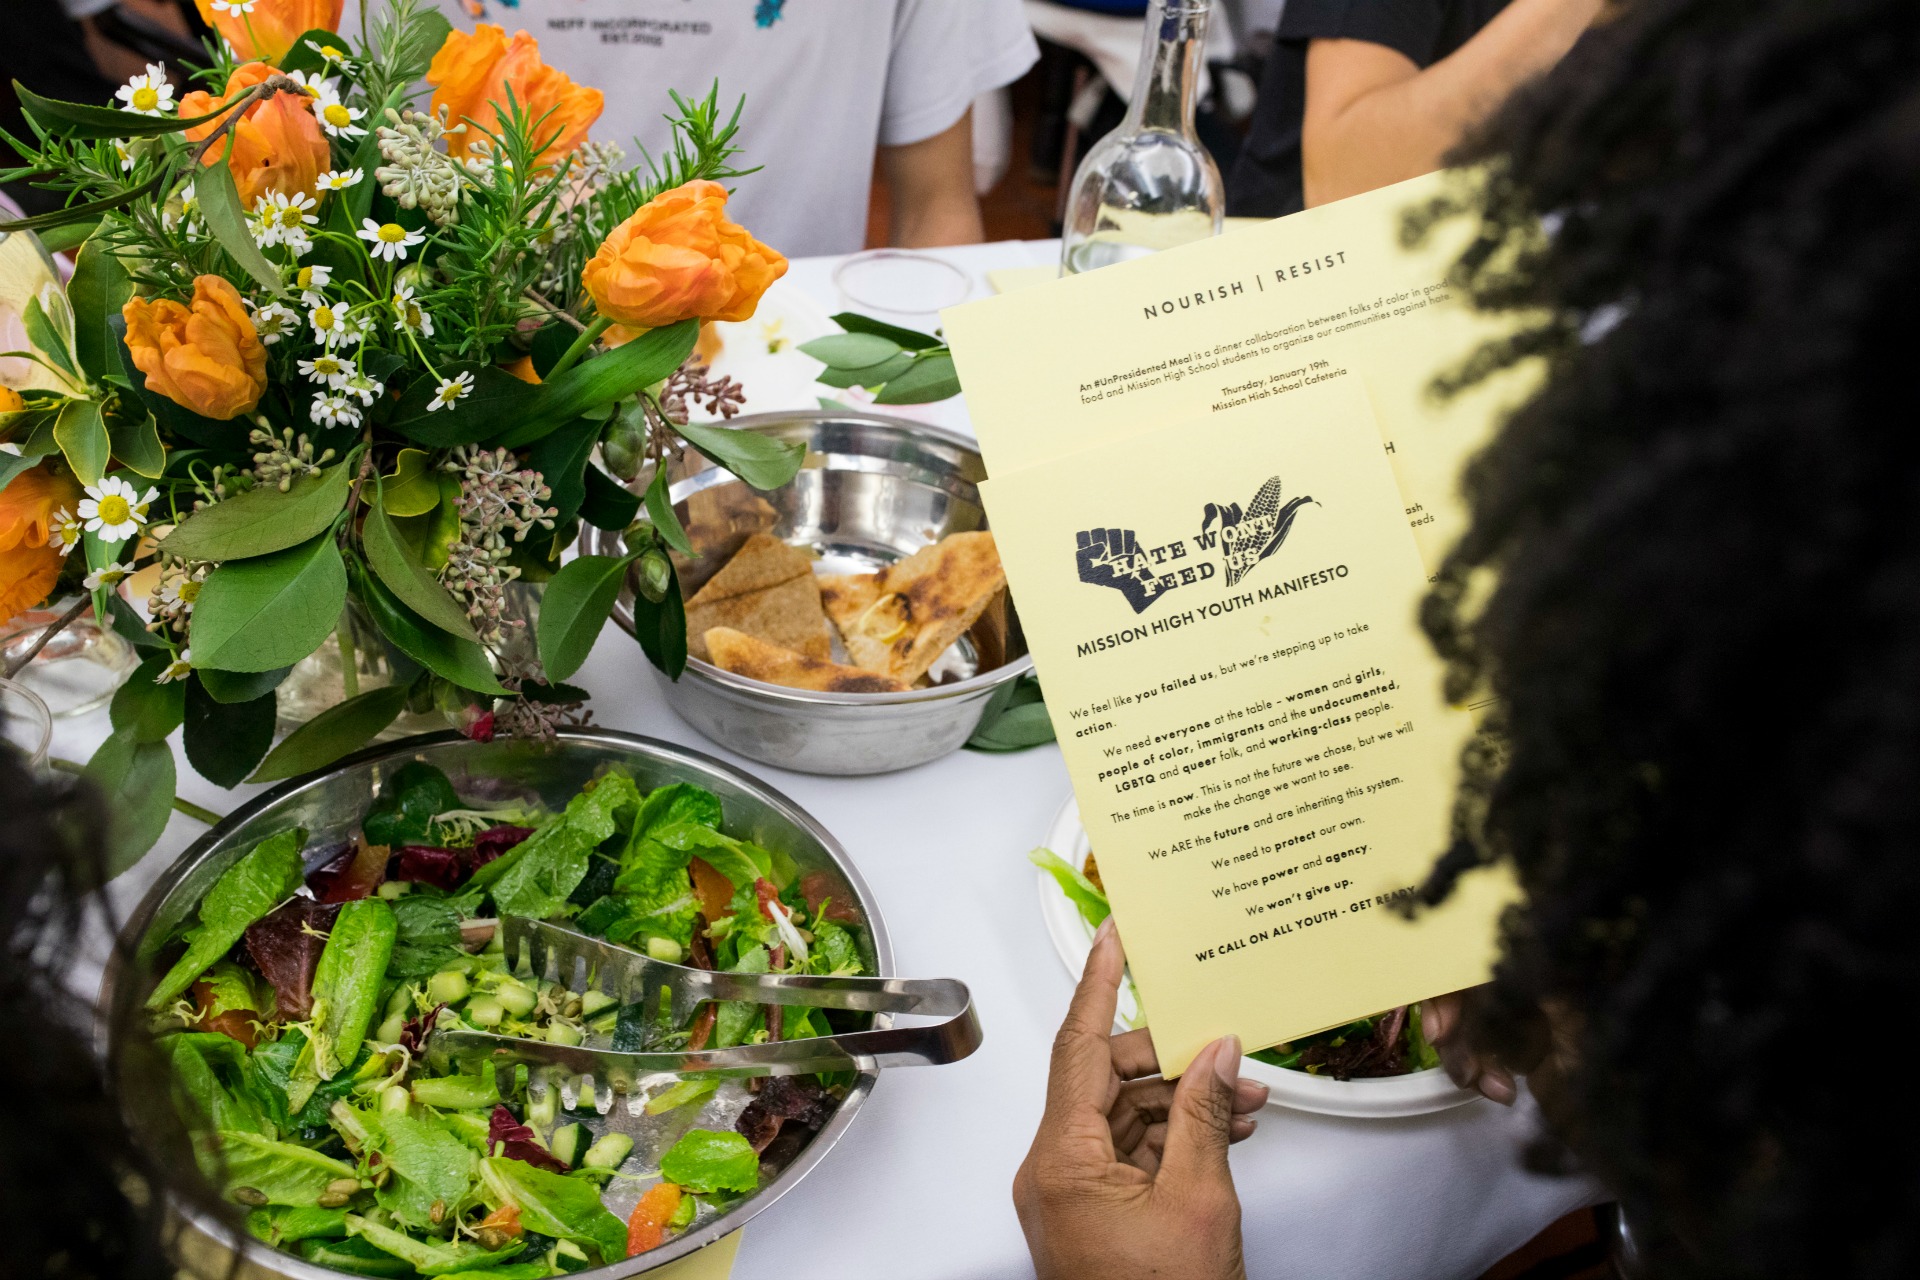 Nourish|Resist's first event, "An Unpresidented Meal," combined political organizing and a delicious meal.